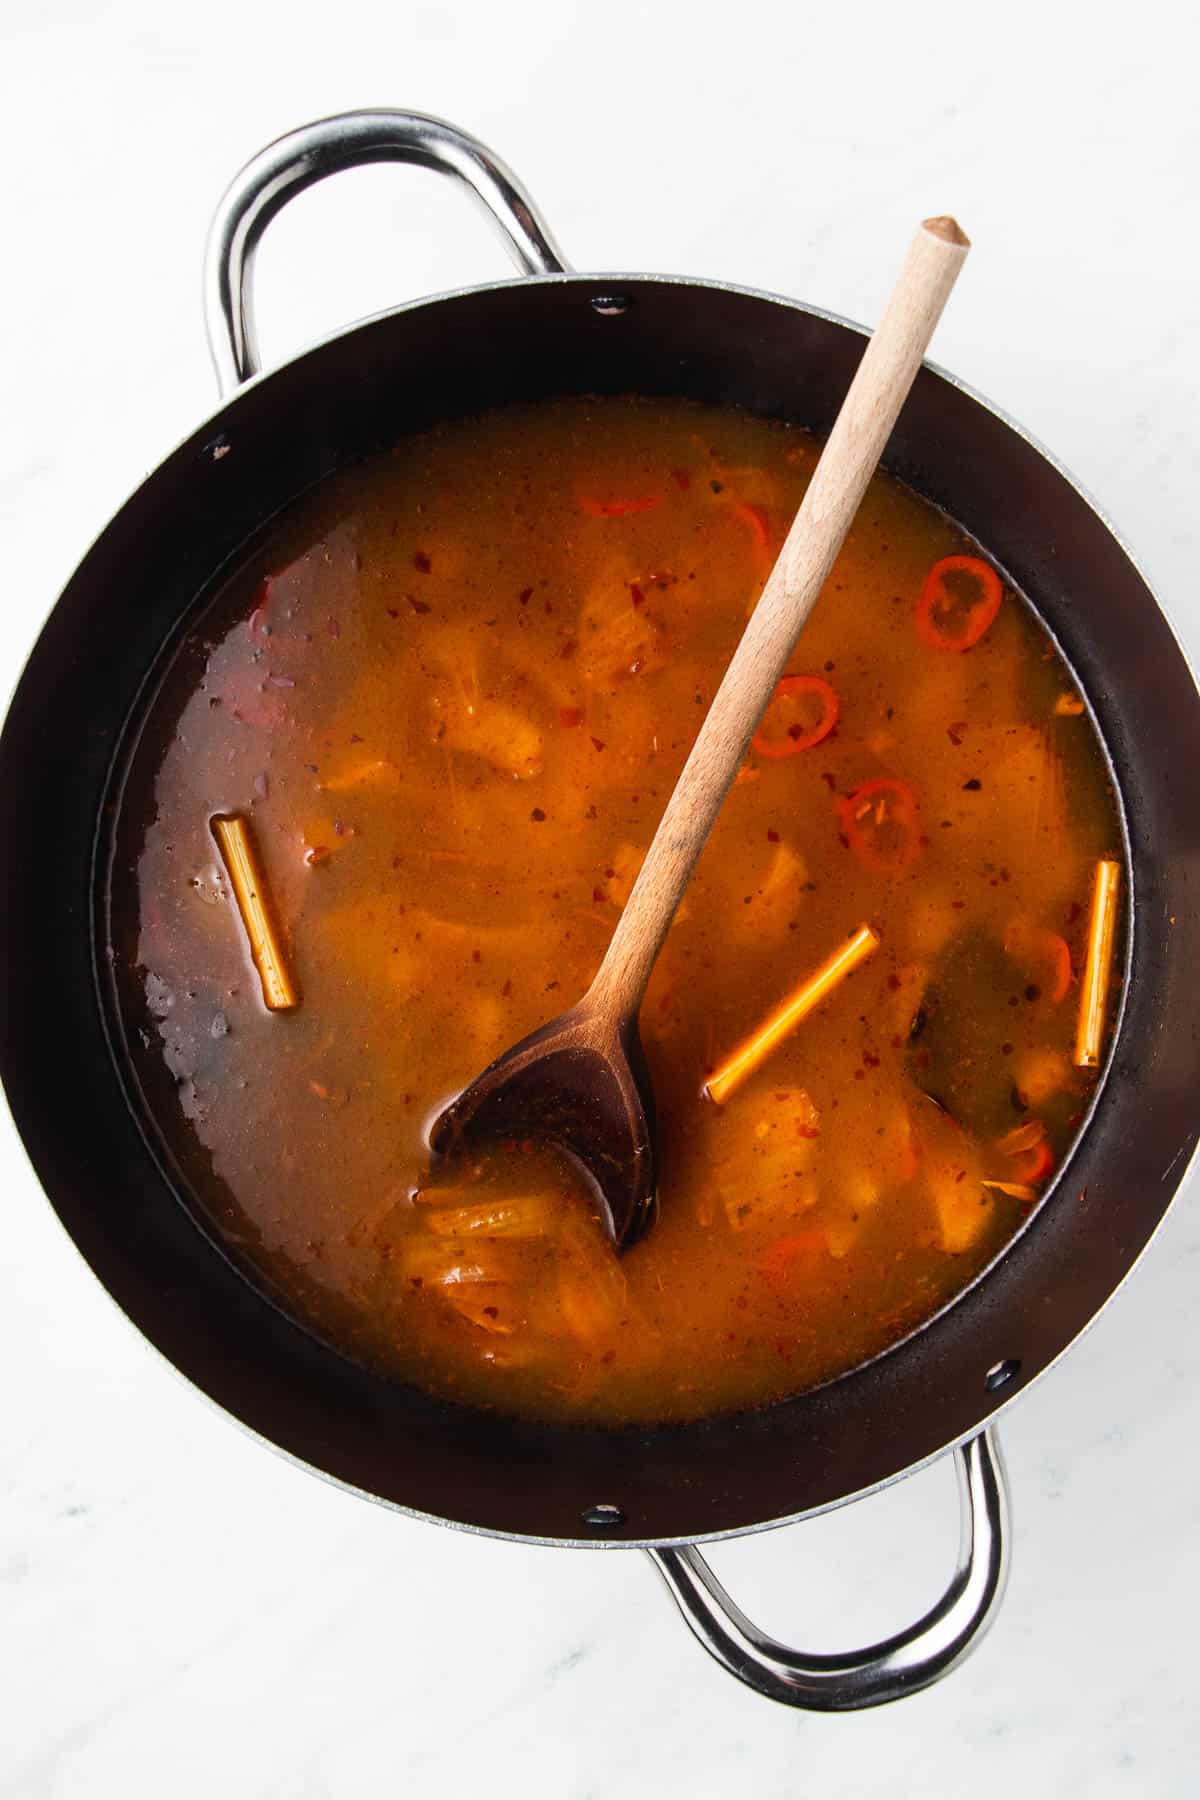 A pot of soup with vegetables and a wooden spoon.